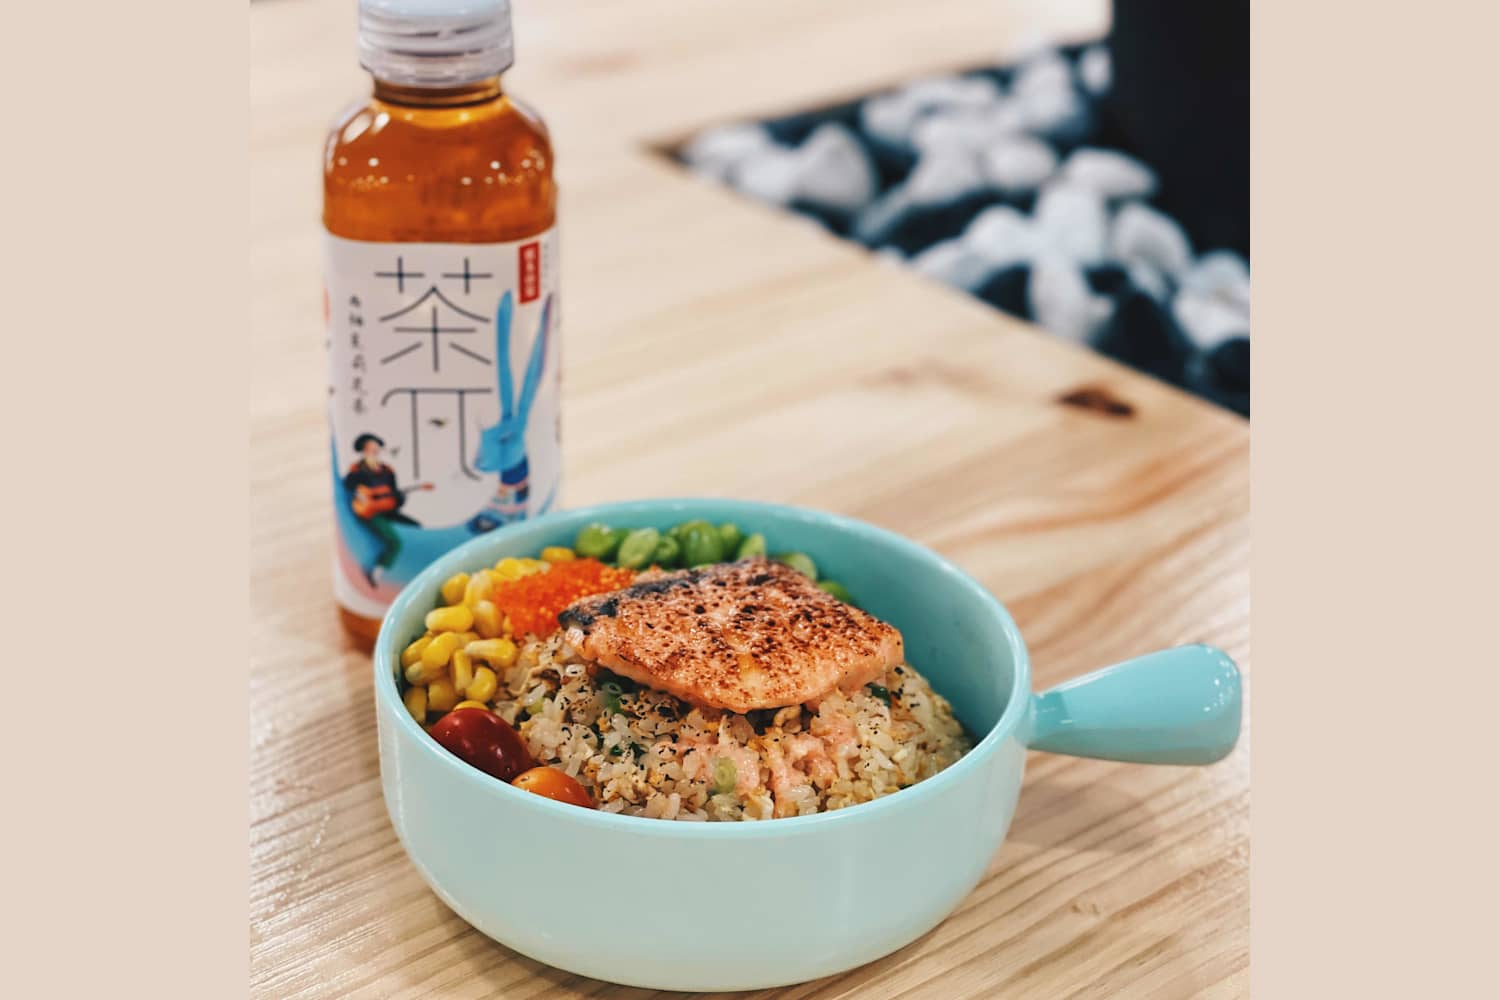 1 x Mentaiko Salmon Fried Rice + Drink Set [Exclusive Deal]